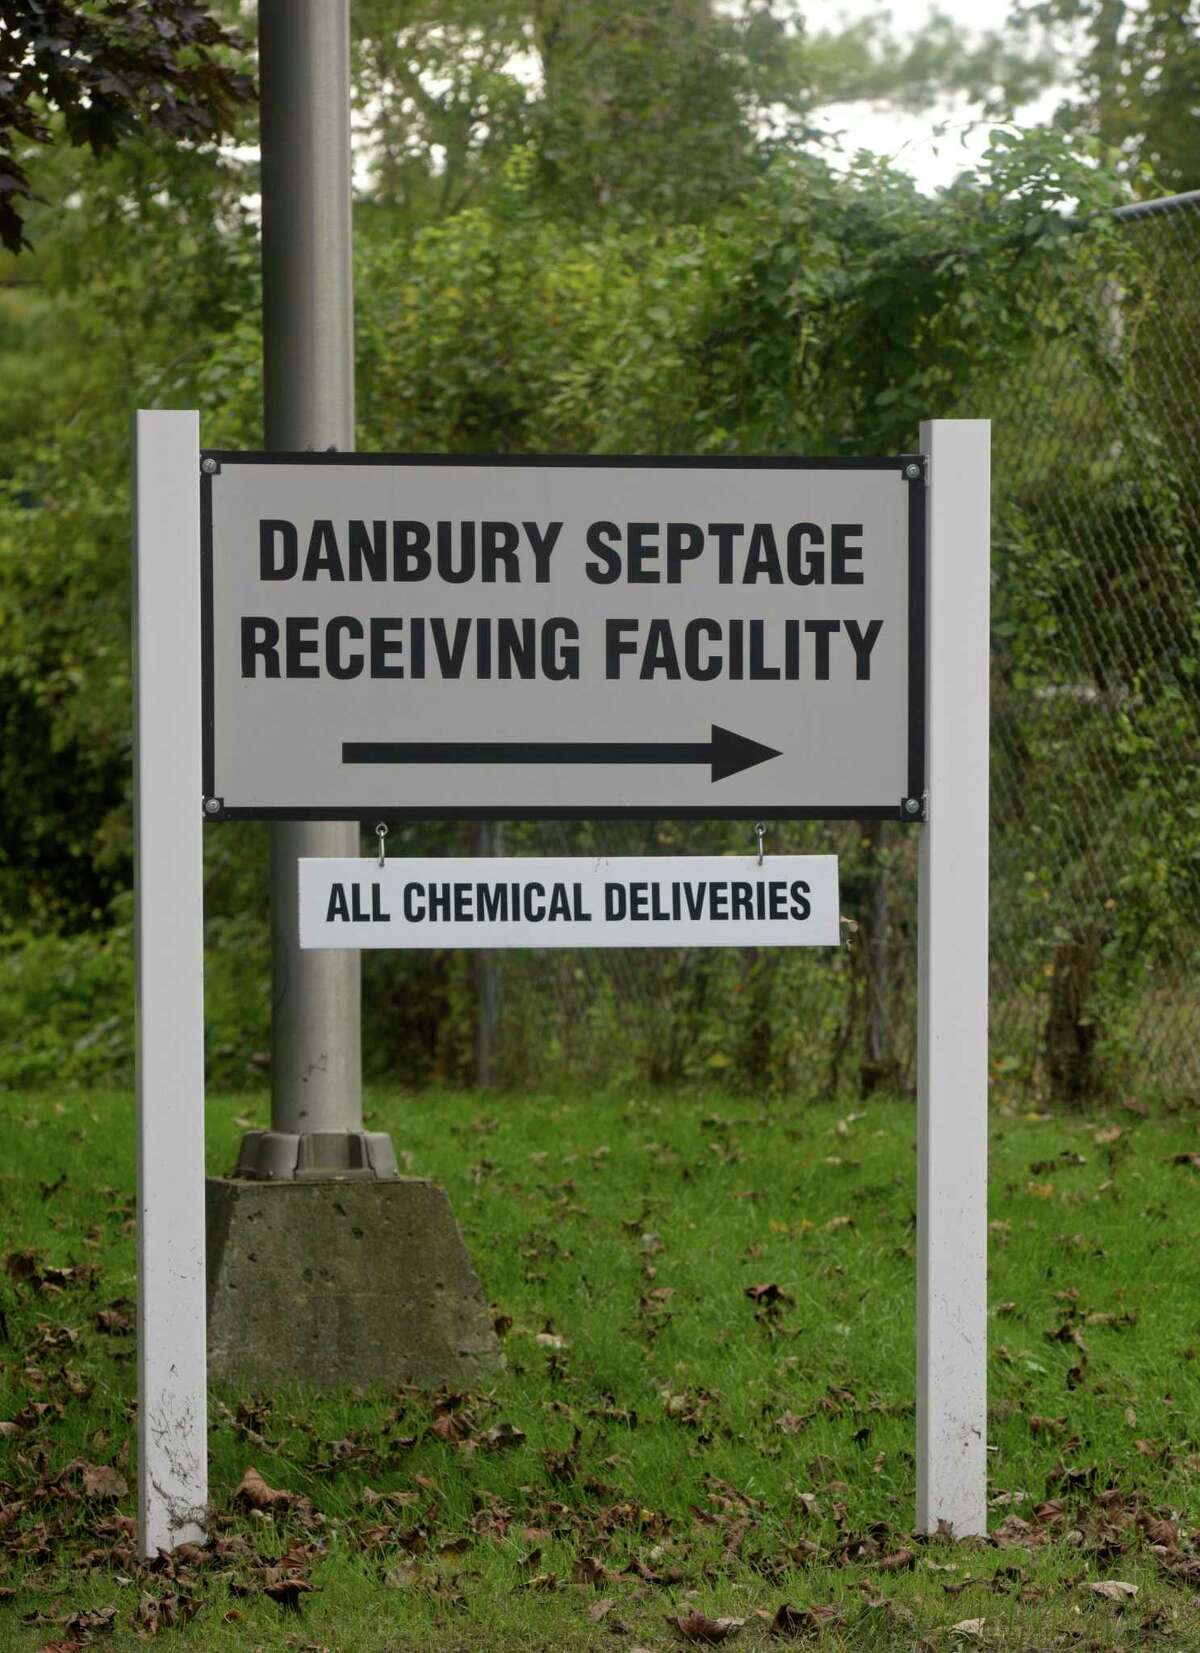 Danbury sewer plant which is being updated to meet state standards and is likely to be renamed after comedian John Oliver. Wednesday, October 7, 2020, in Danbury, Conn.